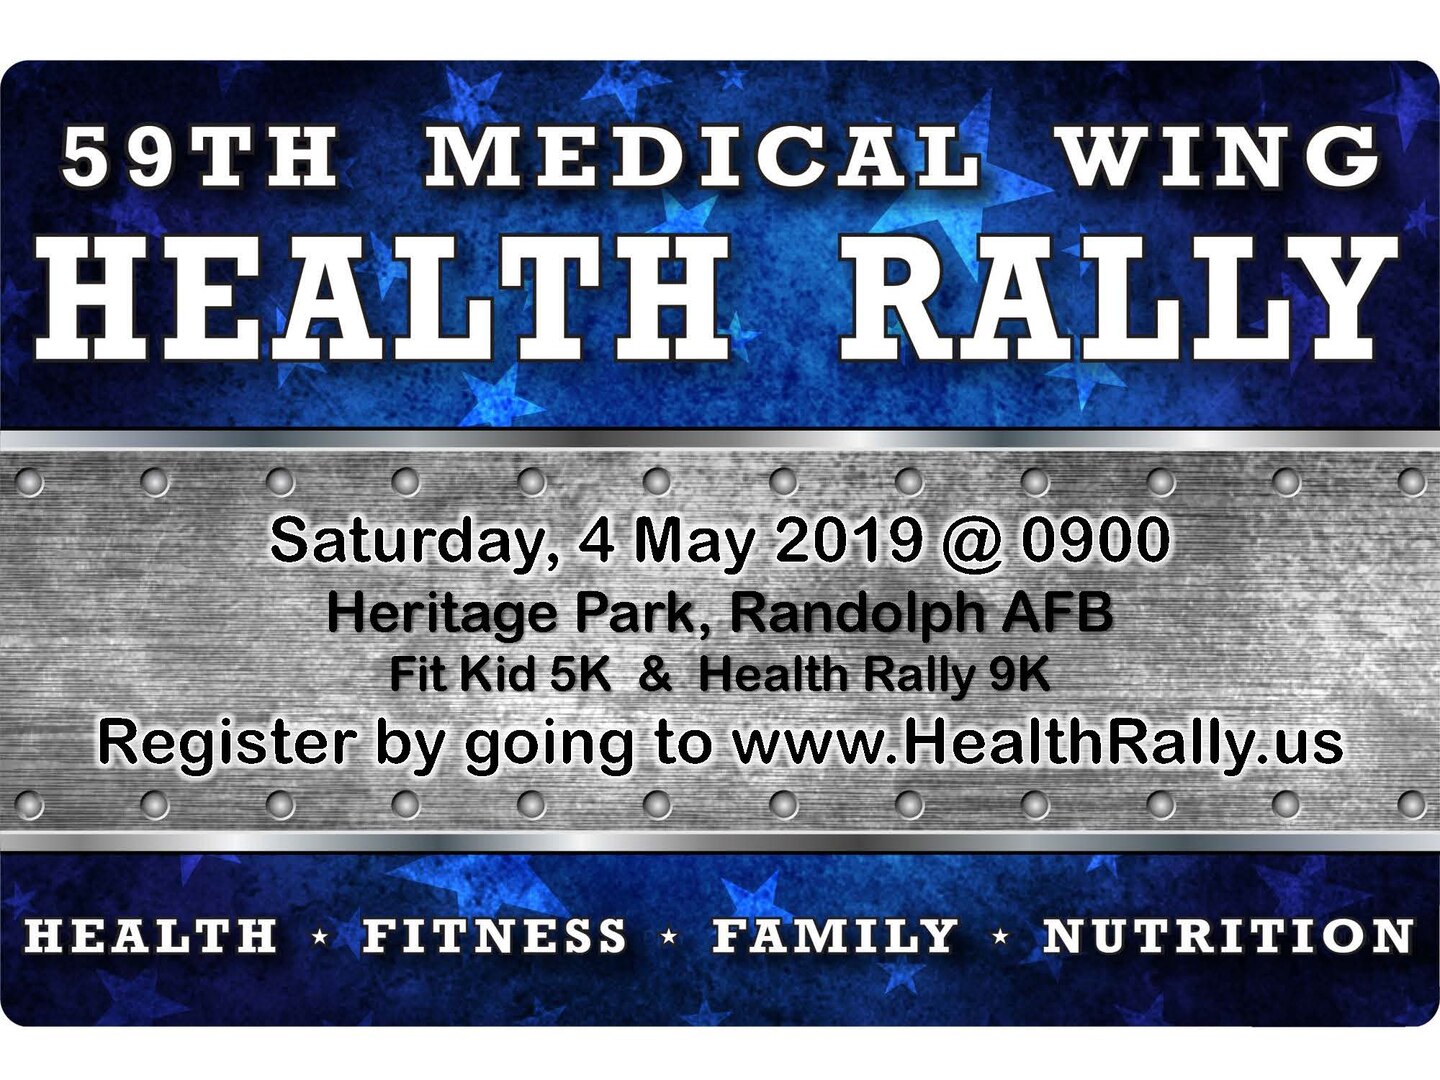 The 59th Medical Wing is again bringing the Joint Base San Antonio community together for a morning of fun and fitness.
The annual 59th MDW Health Rally – which features a 5K run/walk for children and adults, a competitive 9K event and a health fair – is set for 9 a.m. May 4 at Joint Base San Antonio-Randolph’s Airmen’s Heritage Park.